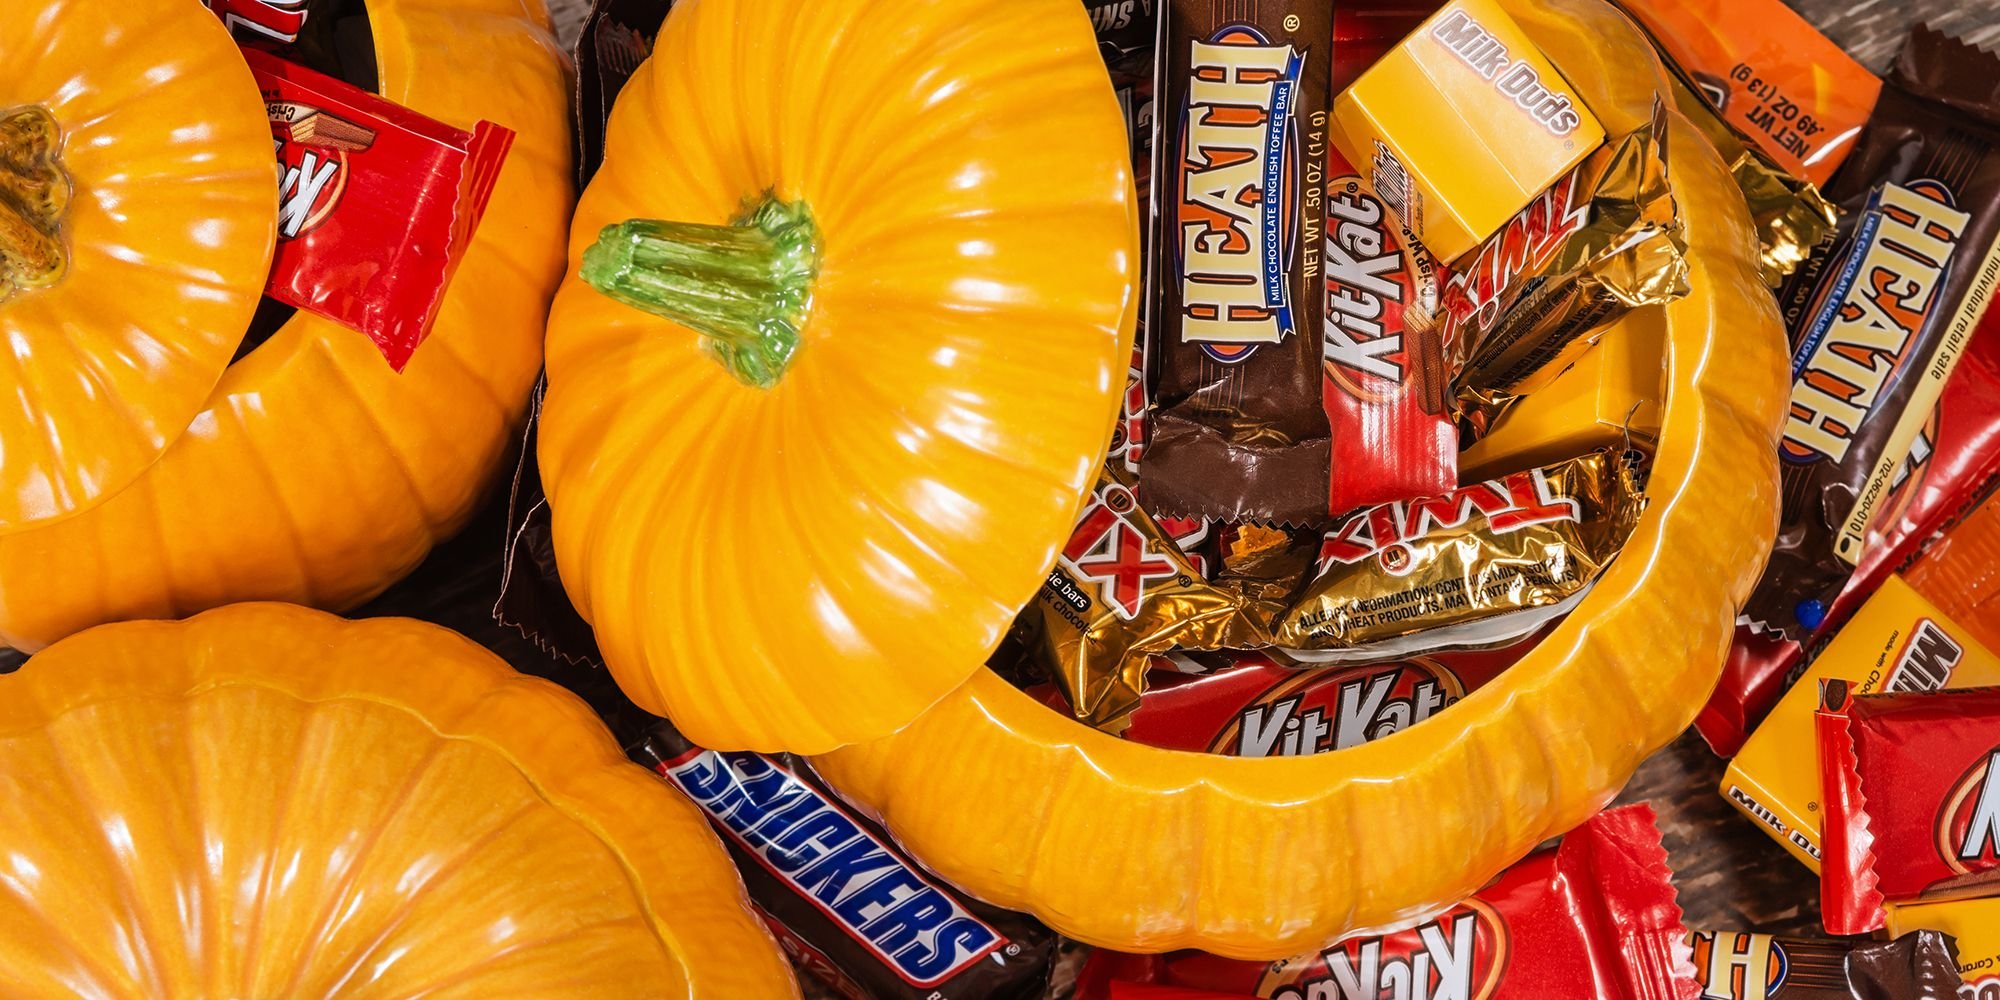 No Need to Panic: There Isn't Actually a Halloween Candy Shortage